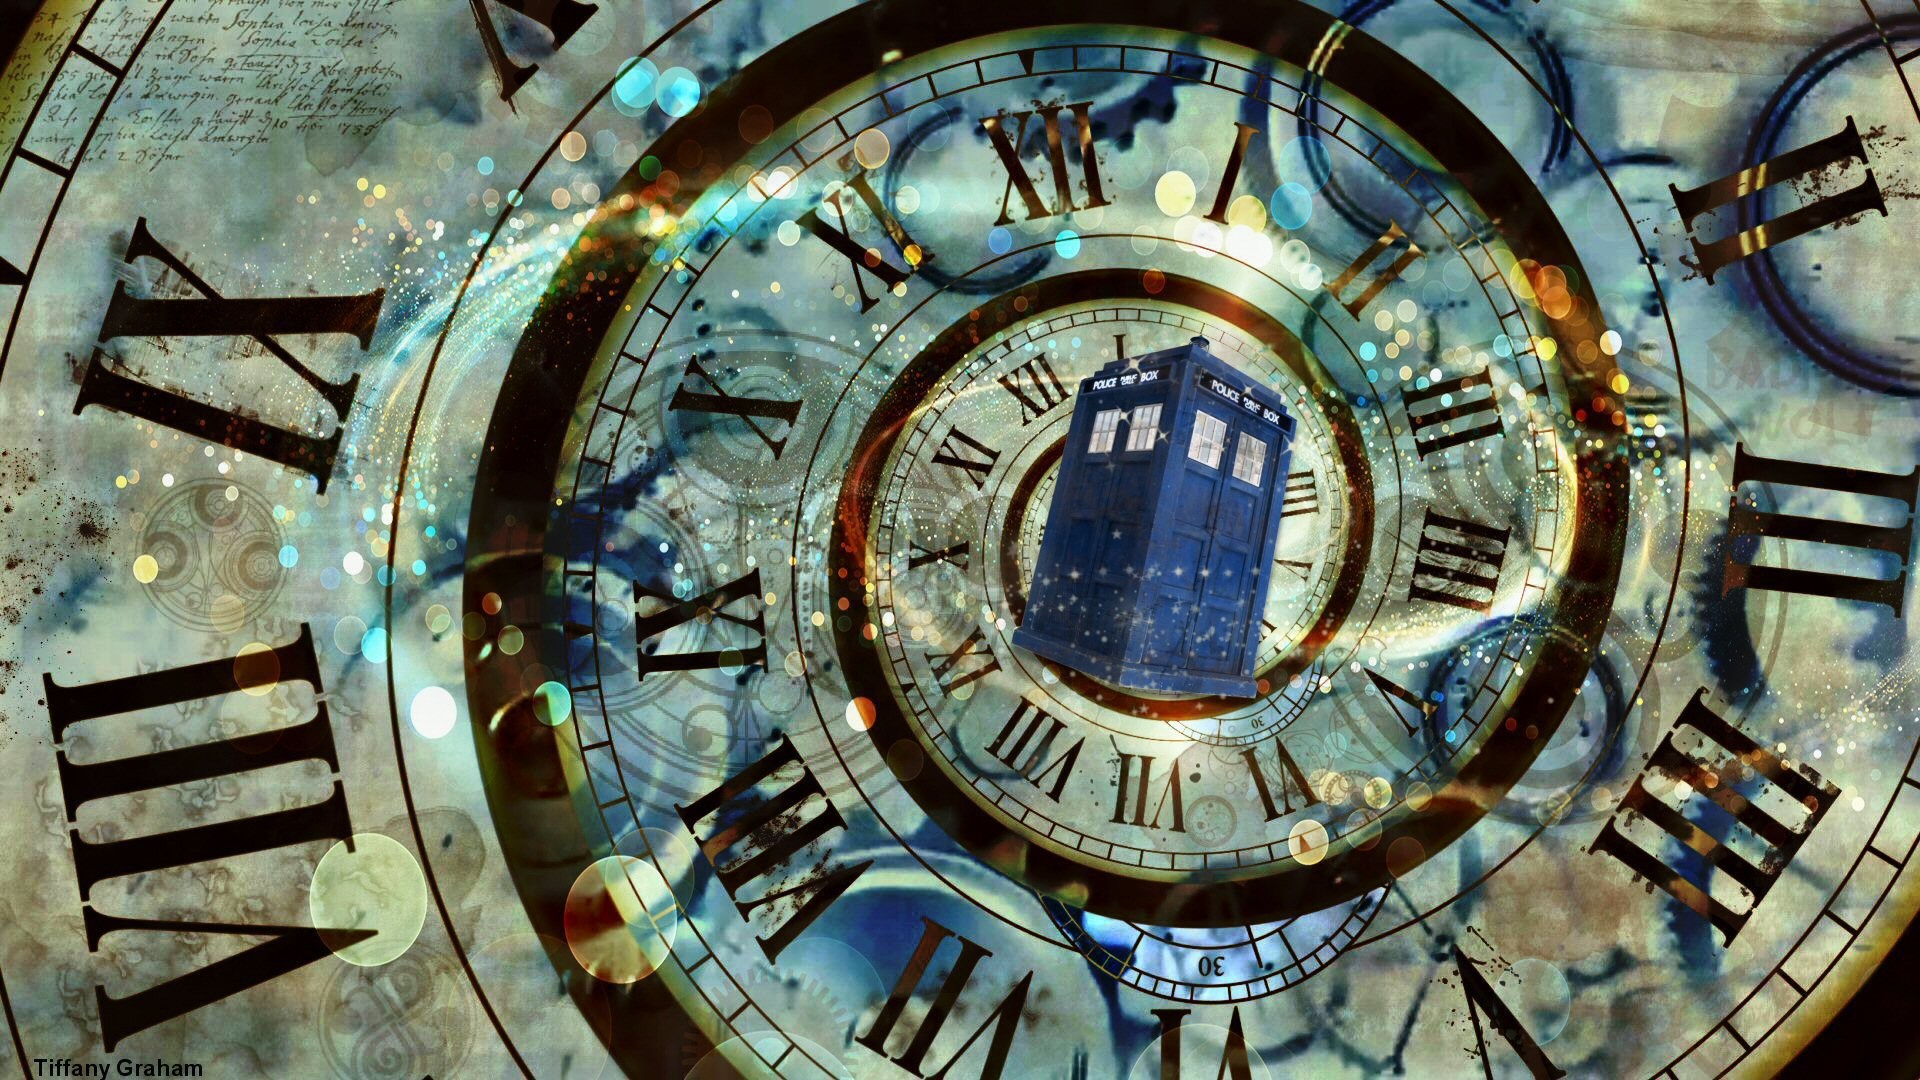 Doctor Who Tardis Wallpaper in HQ Resolution